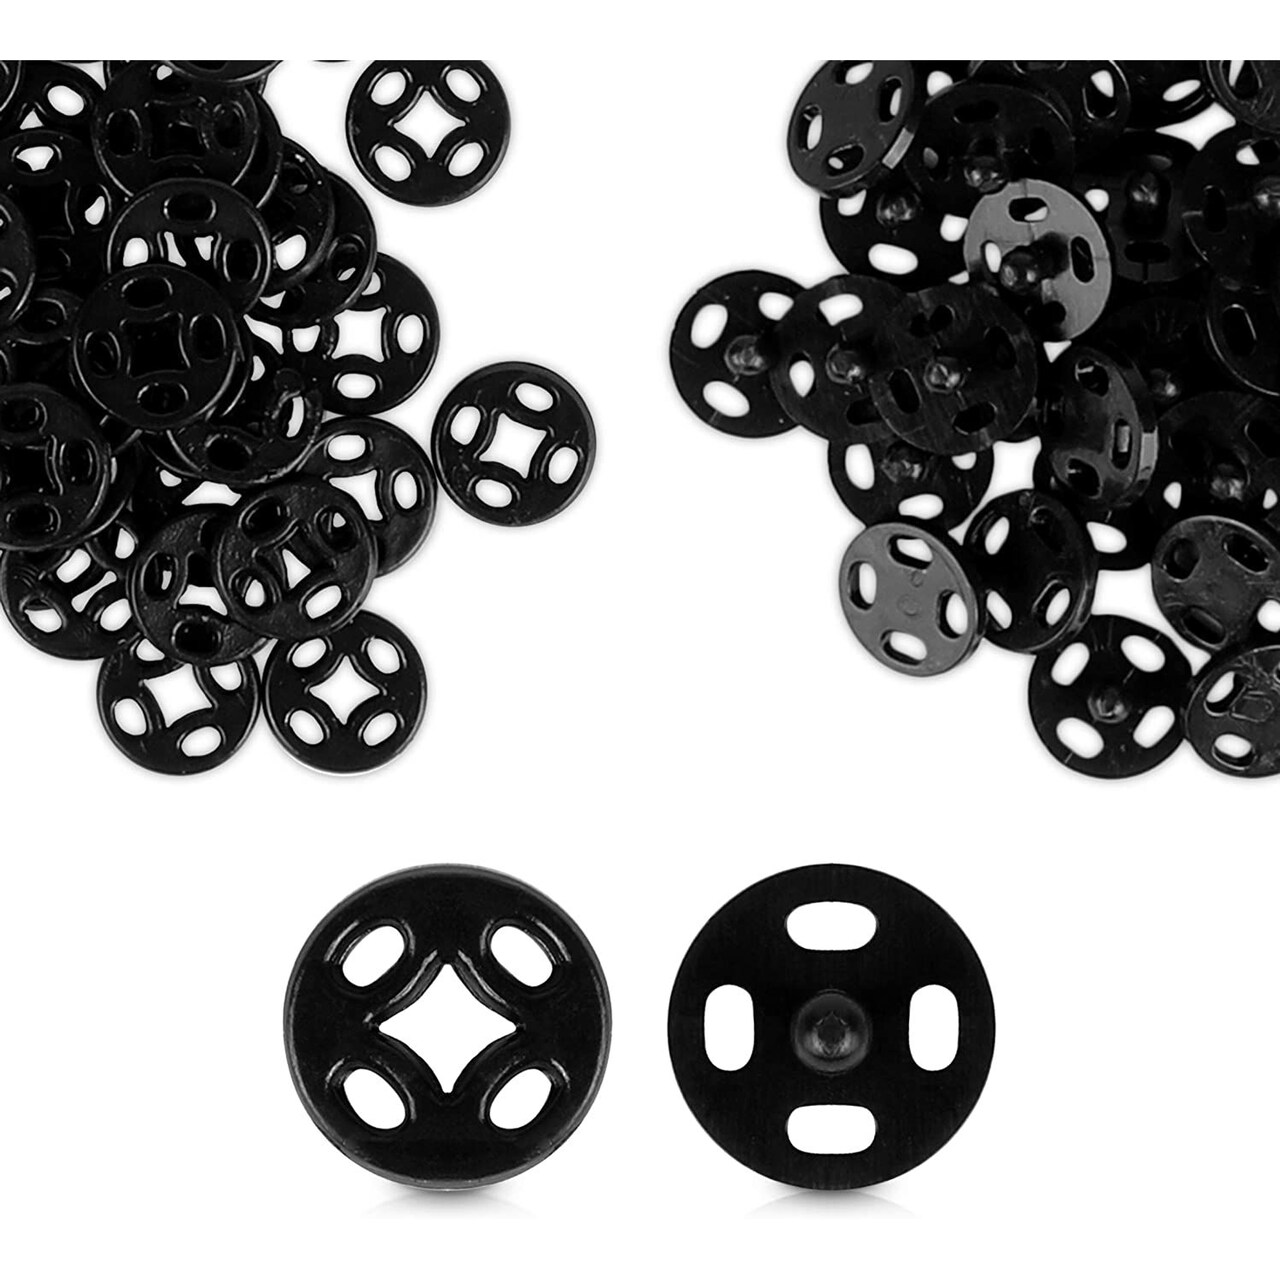 Black Sew-On Snap Buttons, Sewing Supplies for Crafts (0.39 in